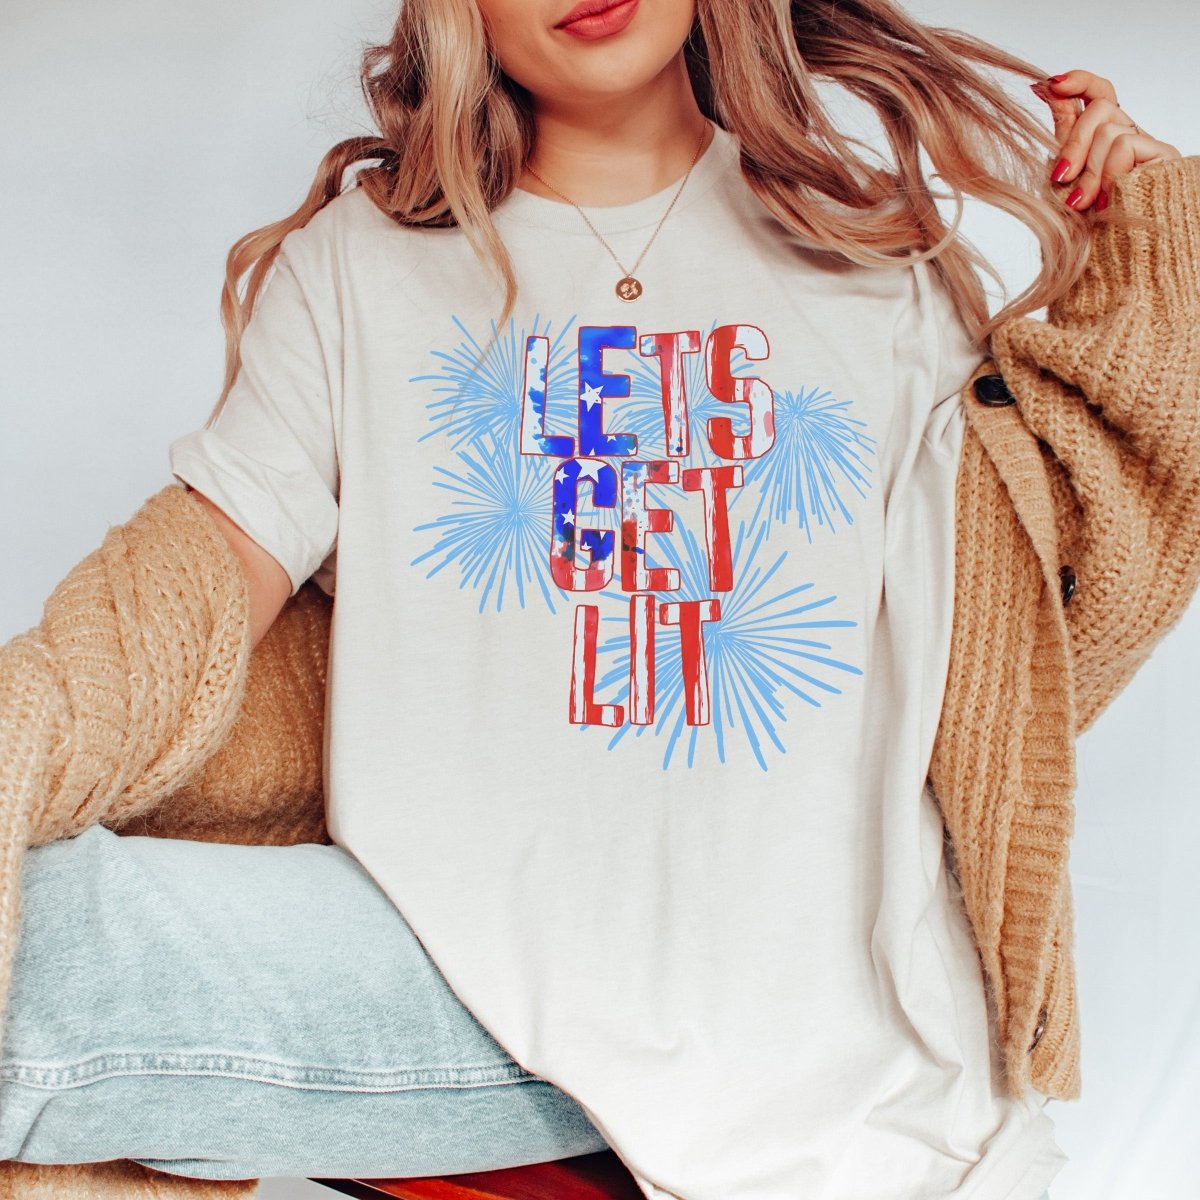 Lets get Lit Fireworks Wholesale Tee - Limeberry Designs